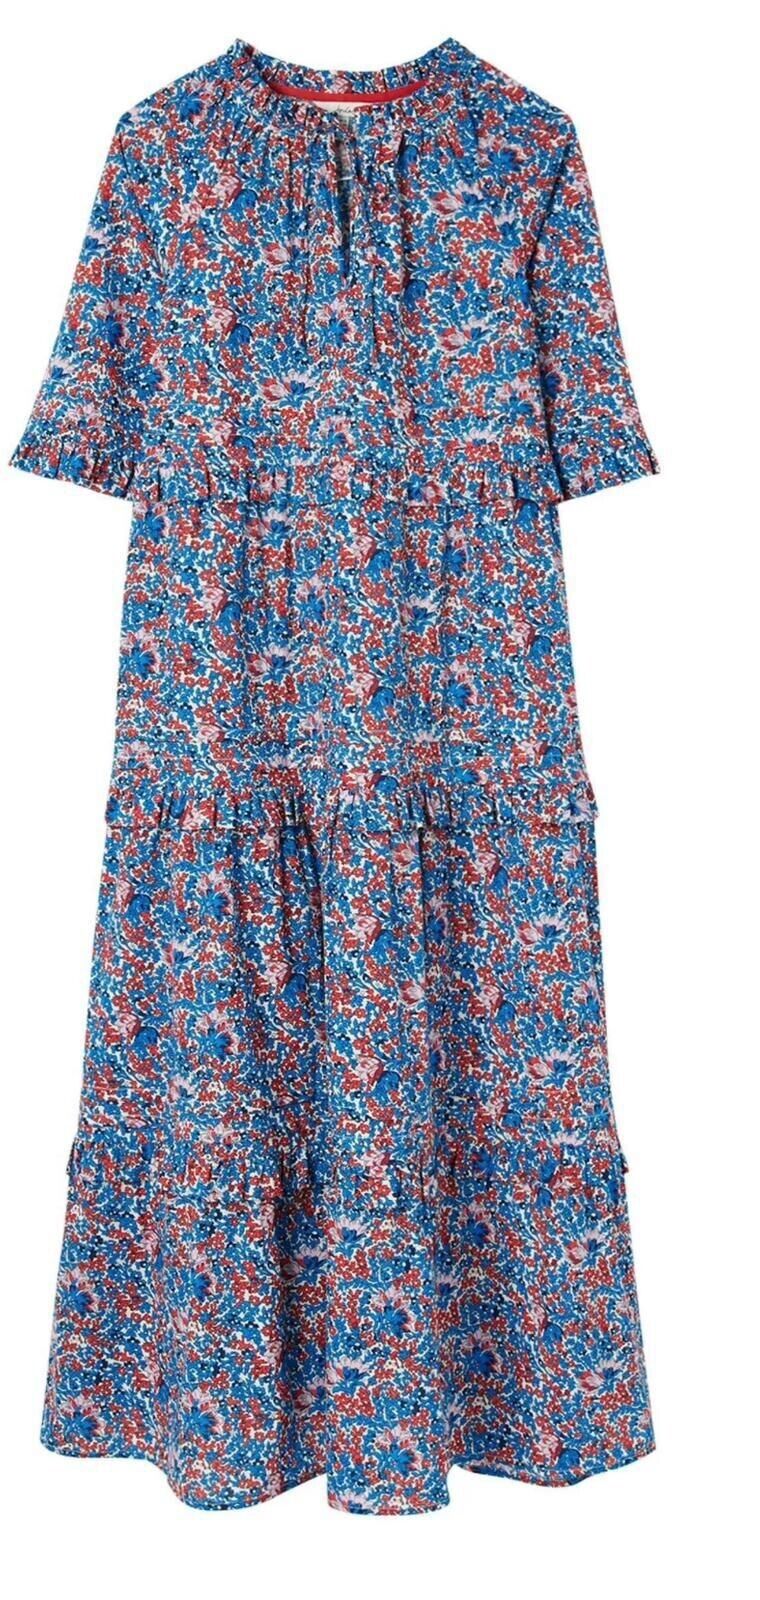 EX Joules Womens Lia Frill Tiered Dress Blue Floral in Sizes 8-18  RRP £99